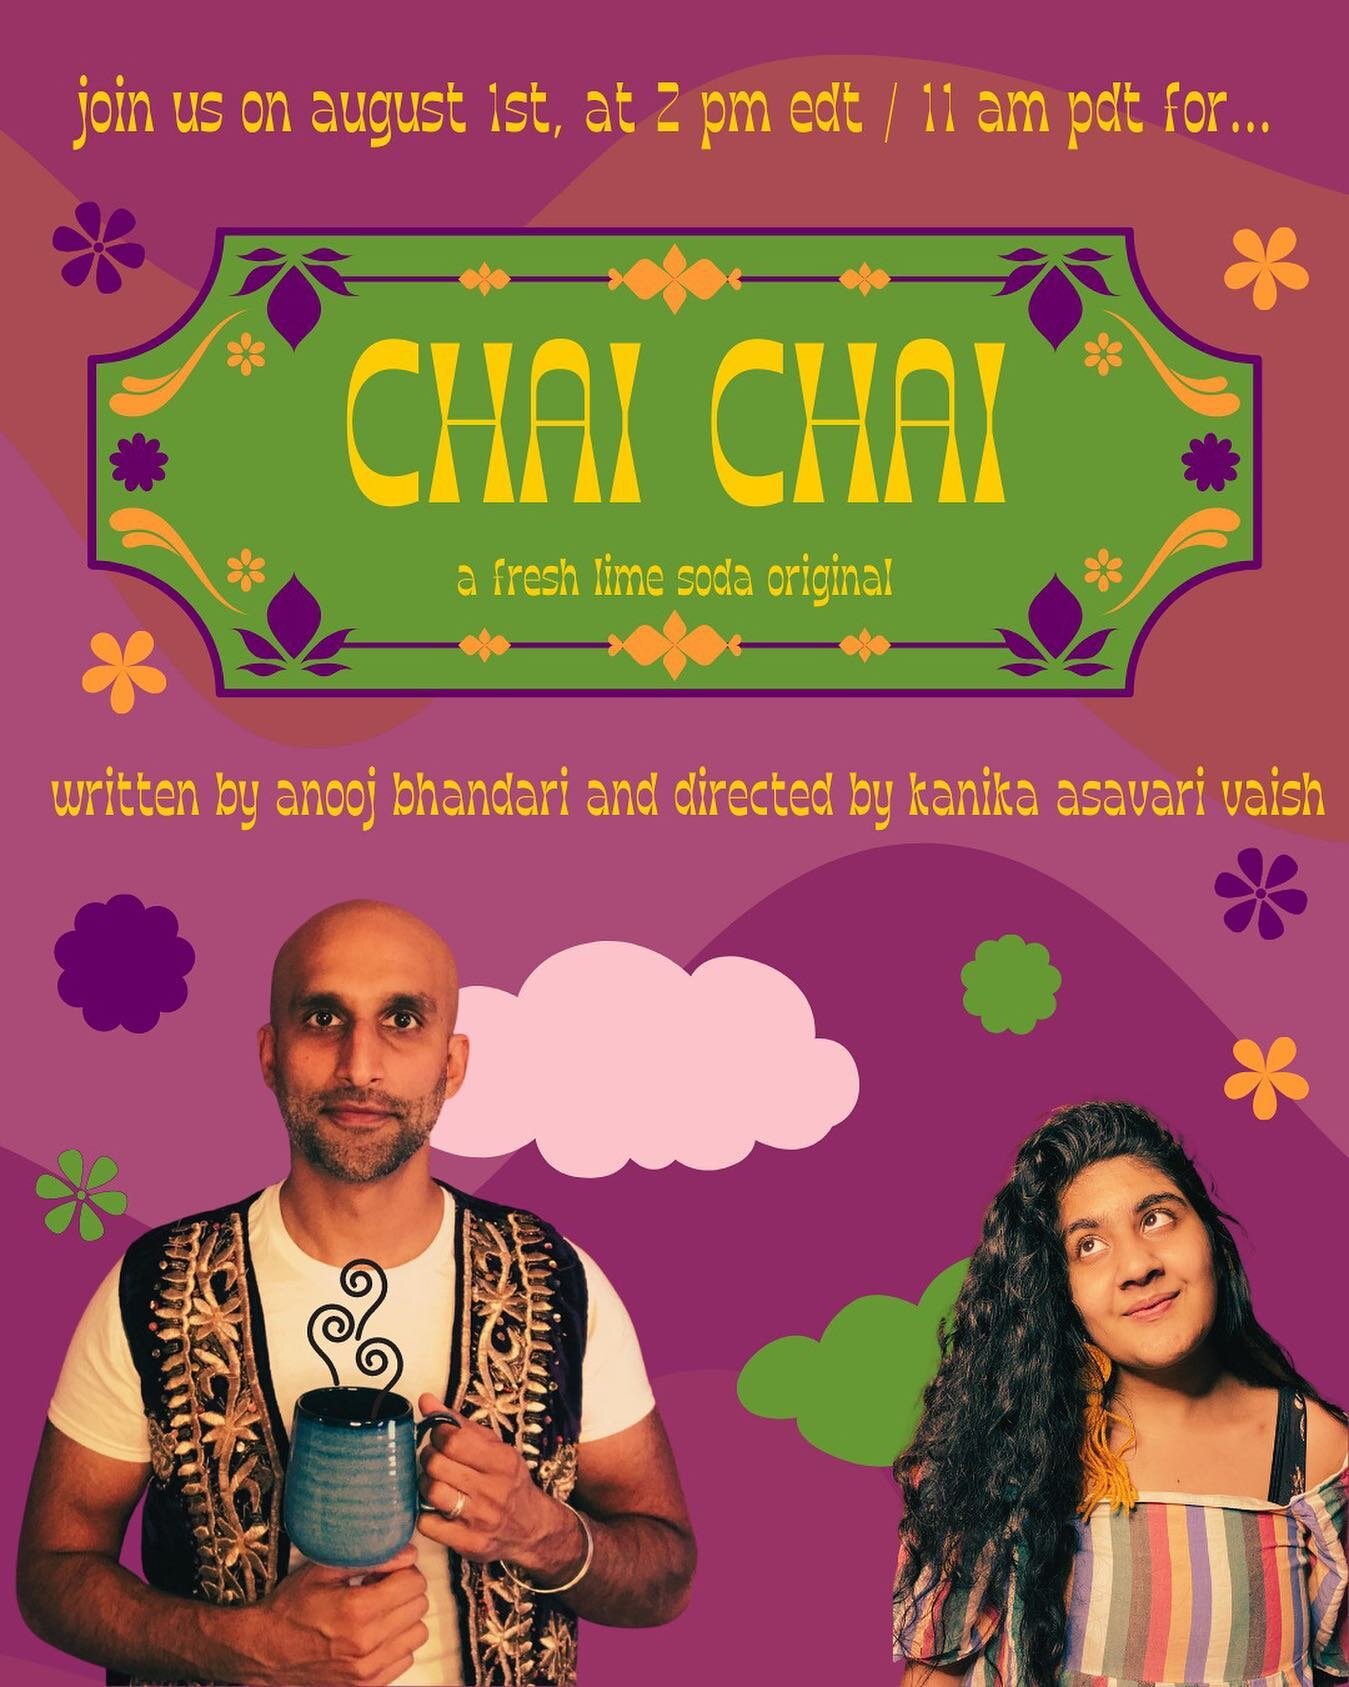 LINK IN BIO TO REGISTER: bit.ly/chaiflsp

❤️

Join us for: CHAI CHAI, written by Anooj Bhandari and directed by Kanika Asavari Vaish! CHAI CHAI is a coming-of-age story told by three fly aunties about what happens after a girl meets a giant who runs 